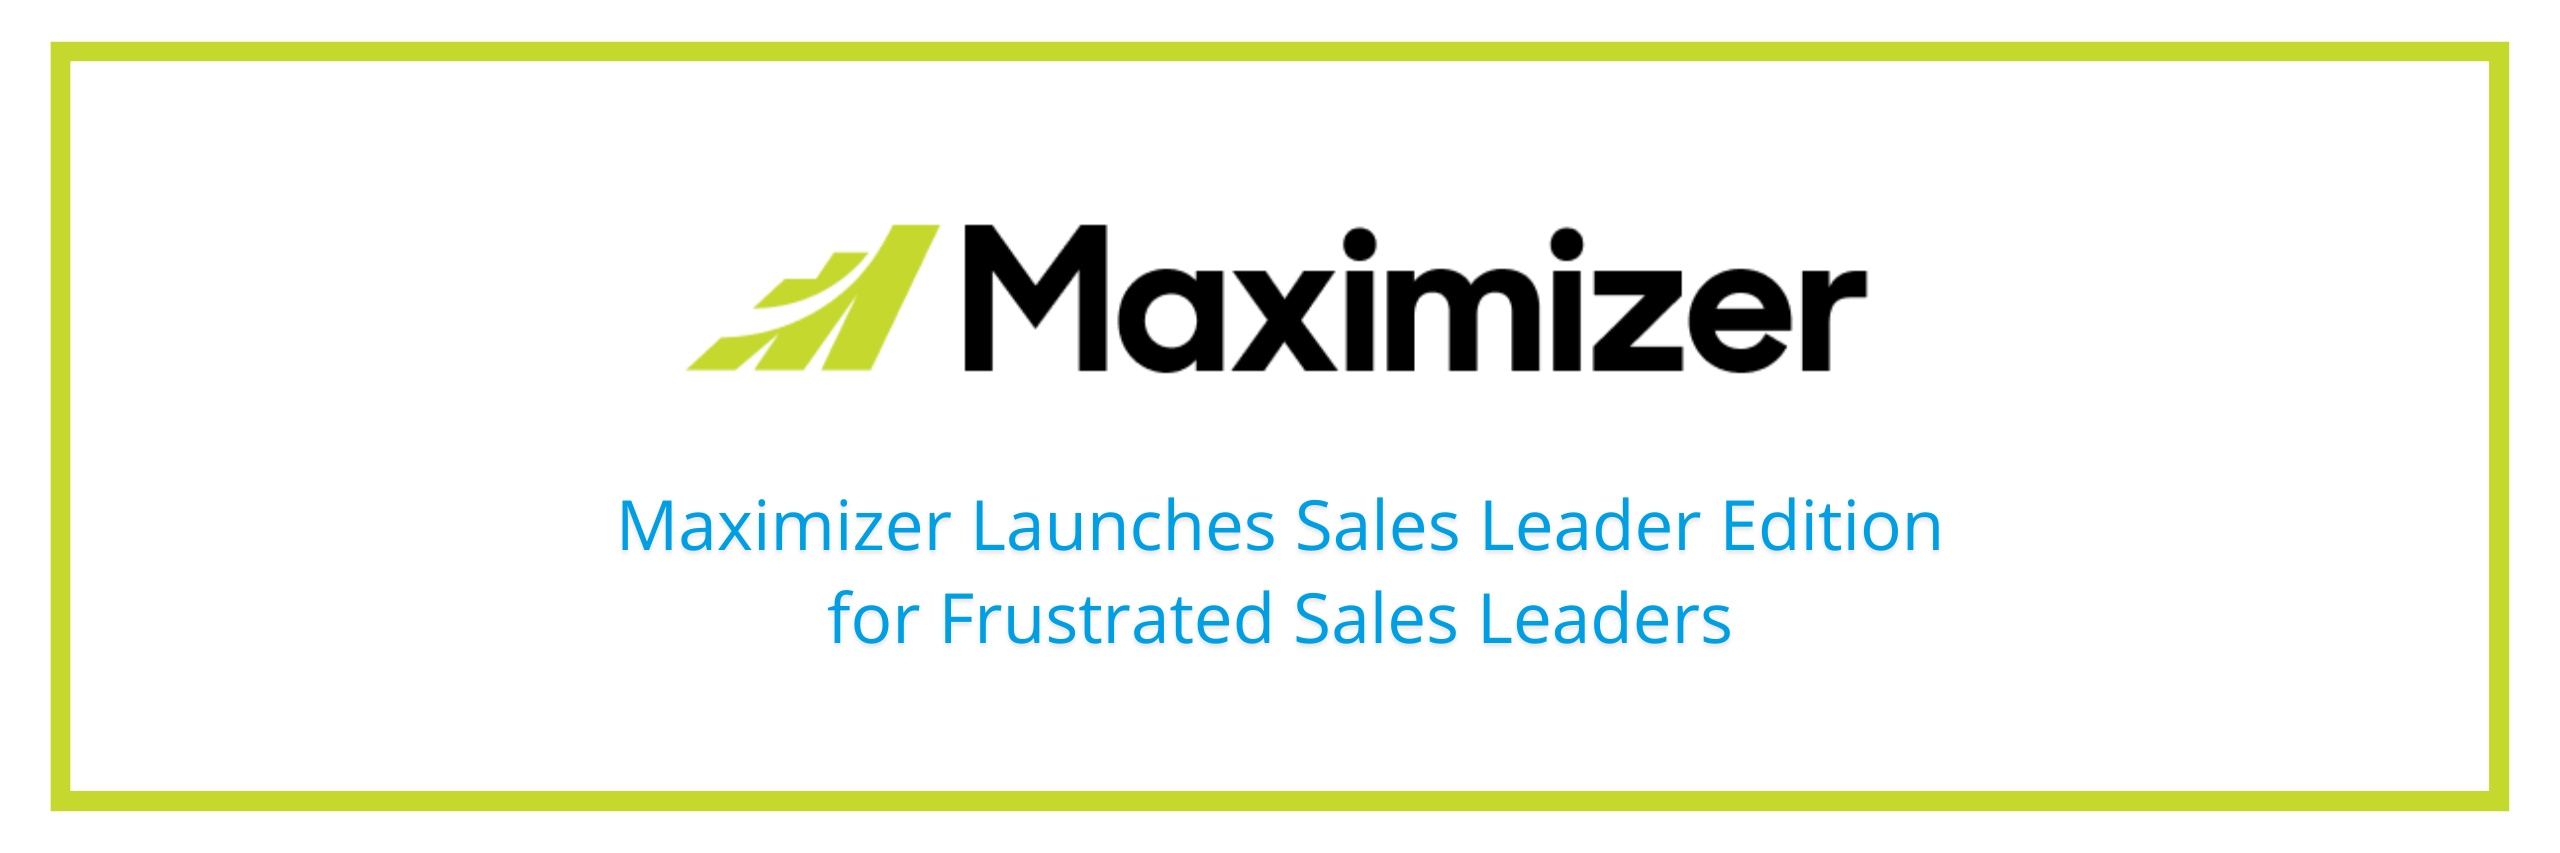 Maximizer Launches Sales Leader Edition for Frustrated Sales Leaders